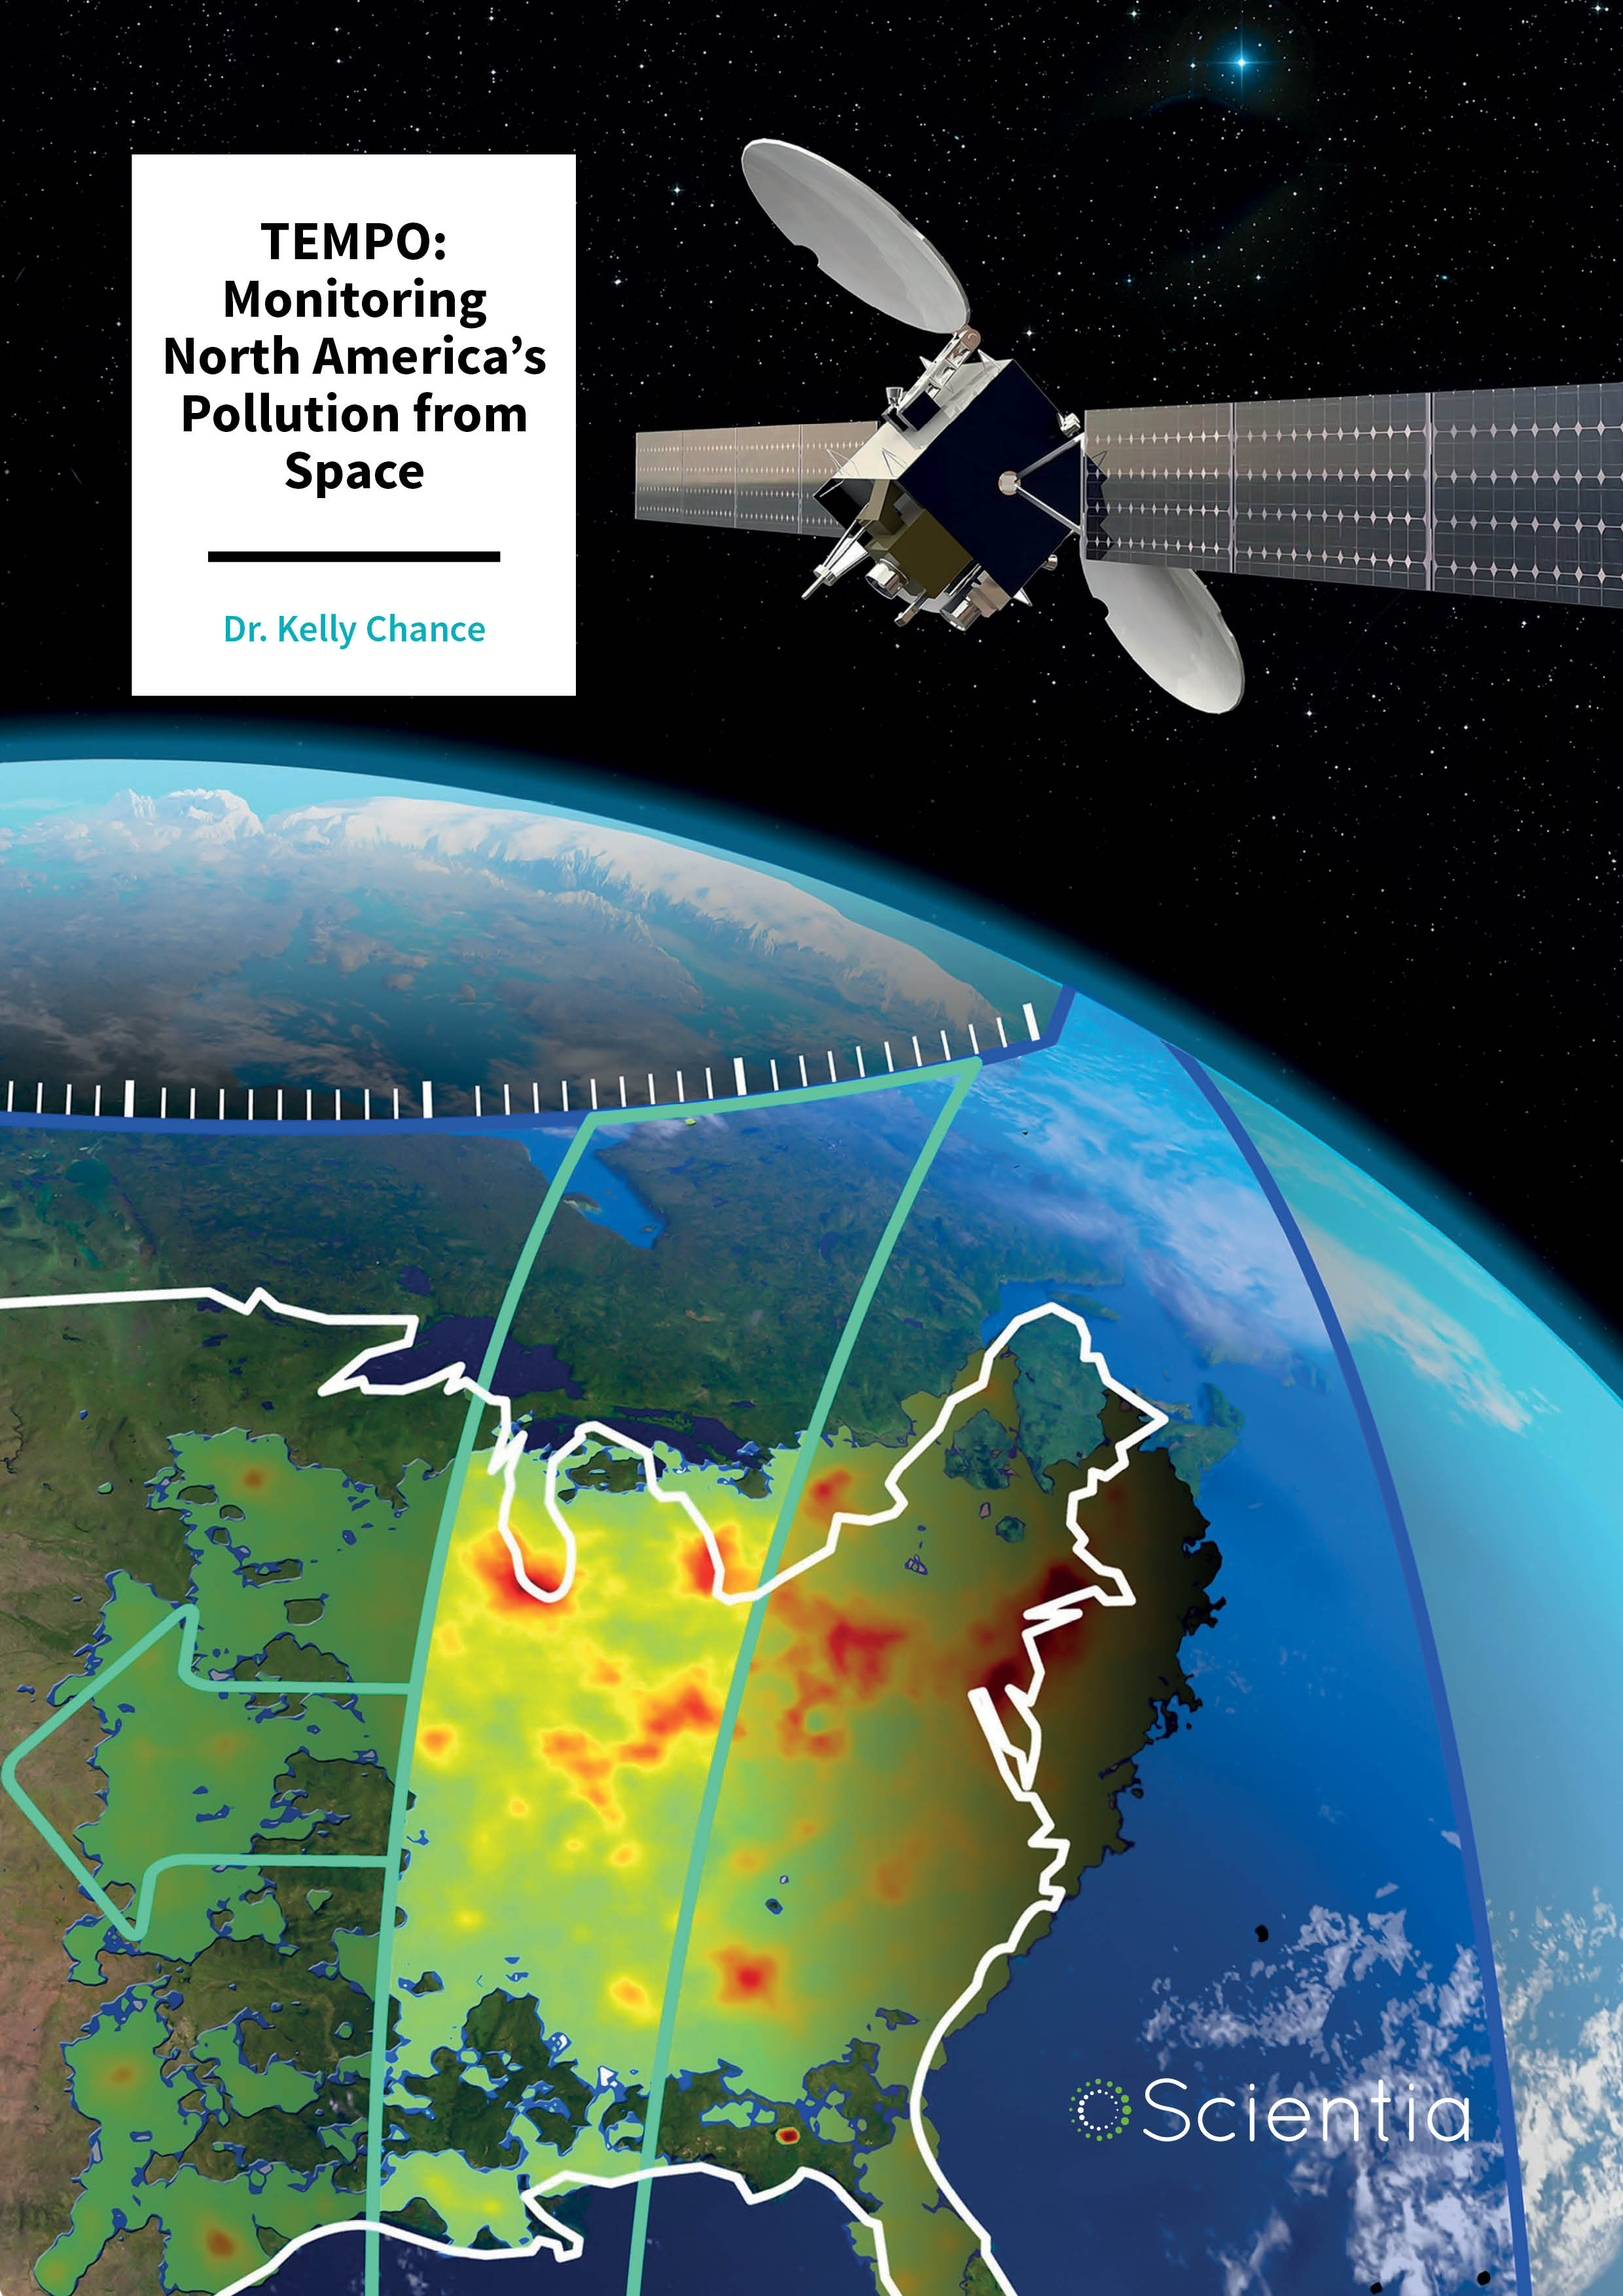 TEMPO: Monitoring North America’s Pollution from Space